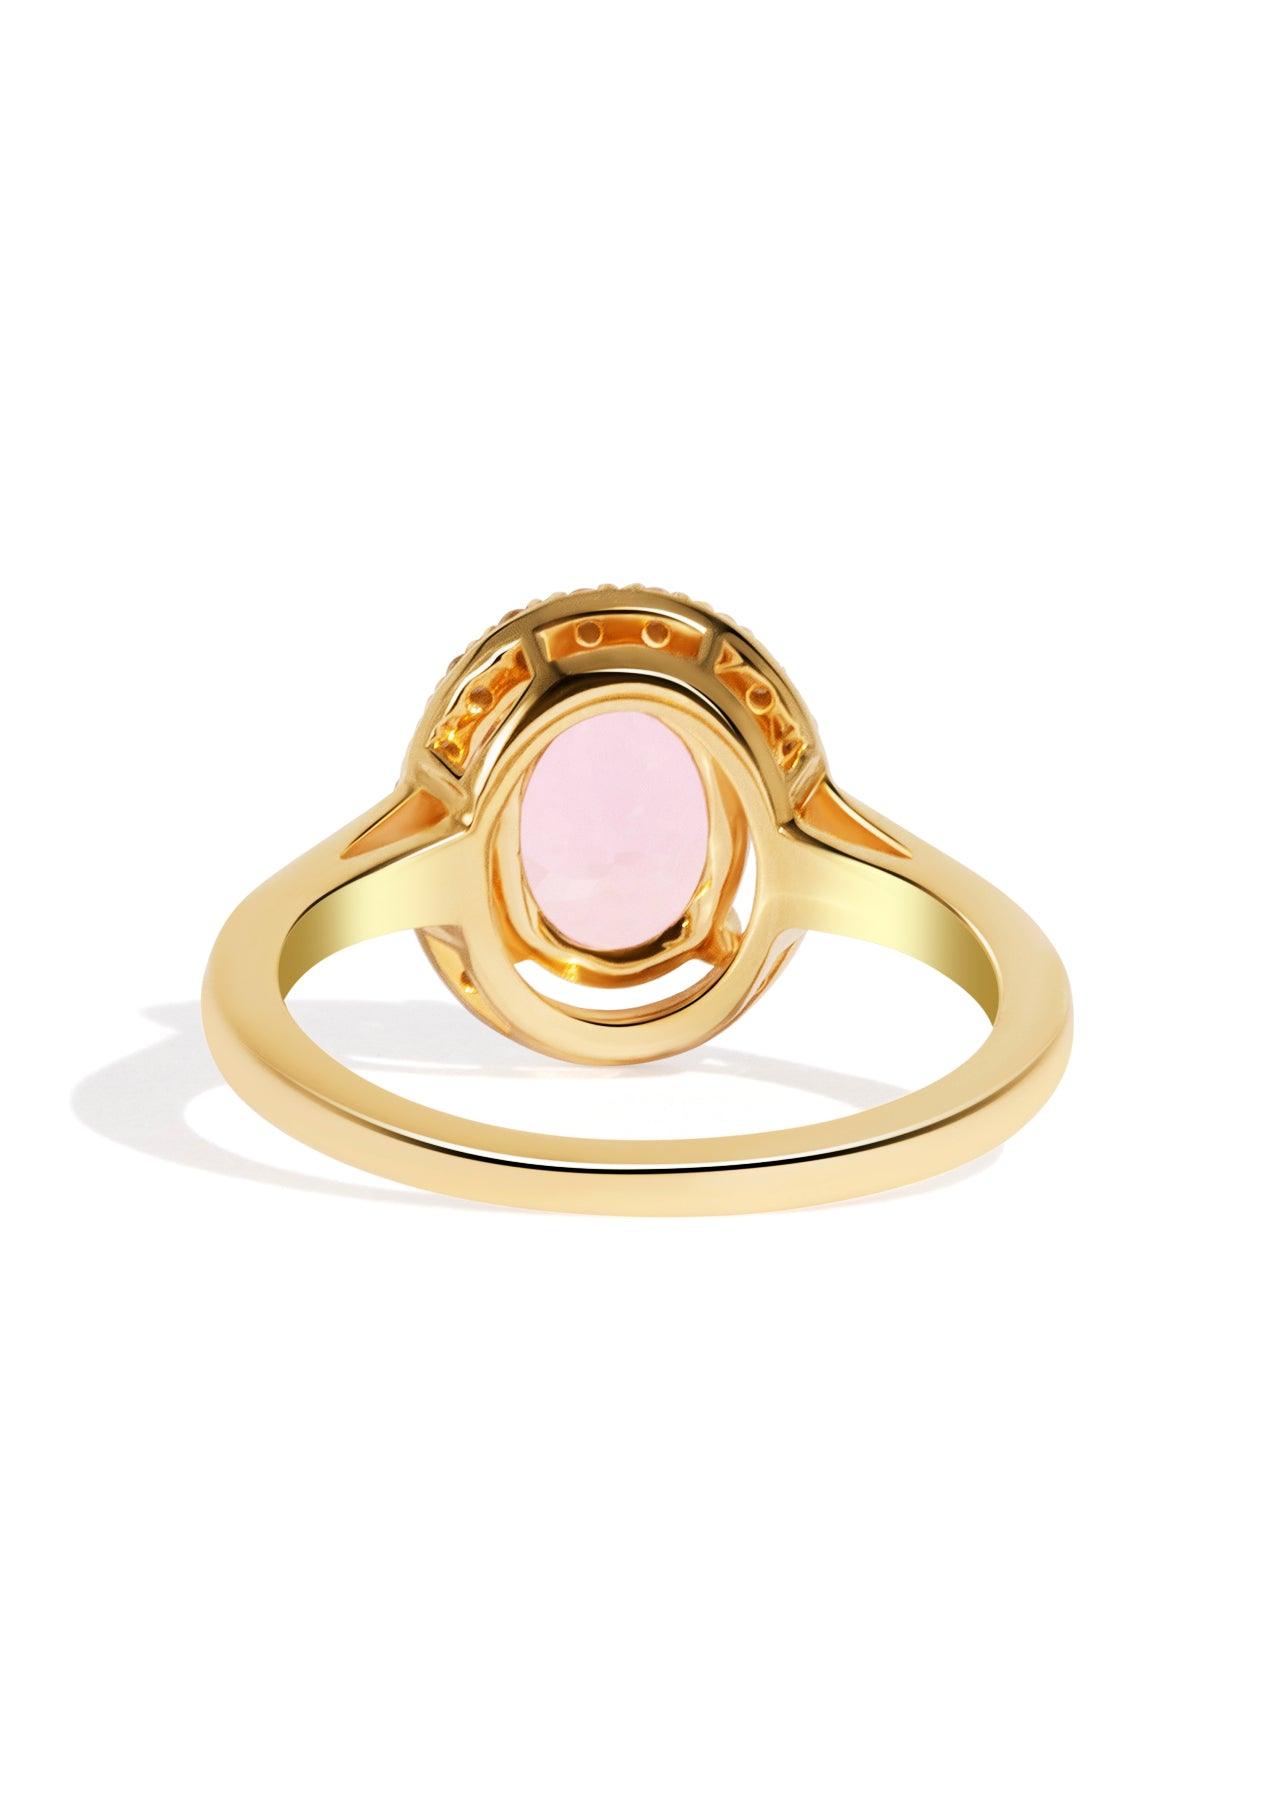 The Iris Ring with 2.29ct Oval Morganite - Molten Store